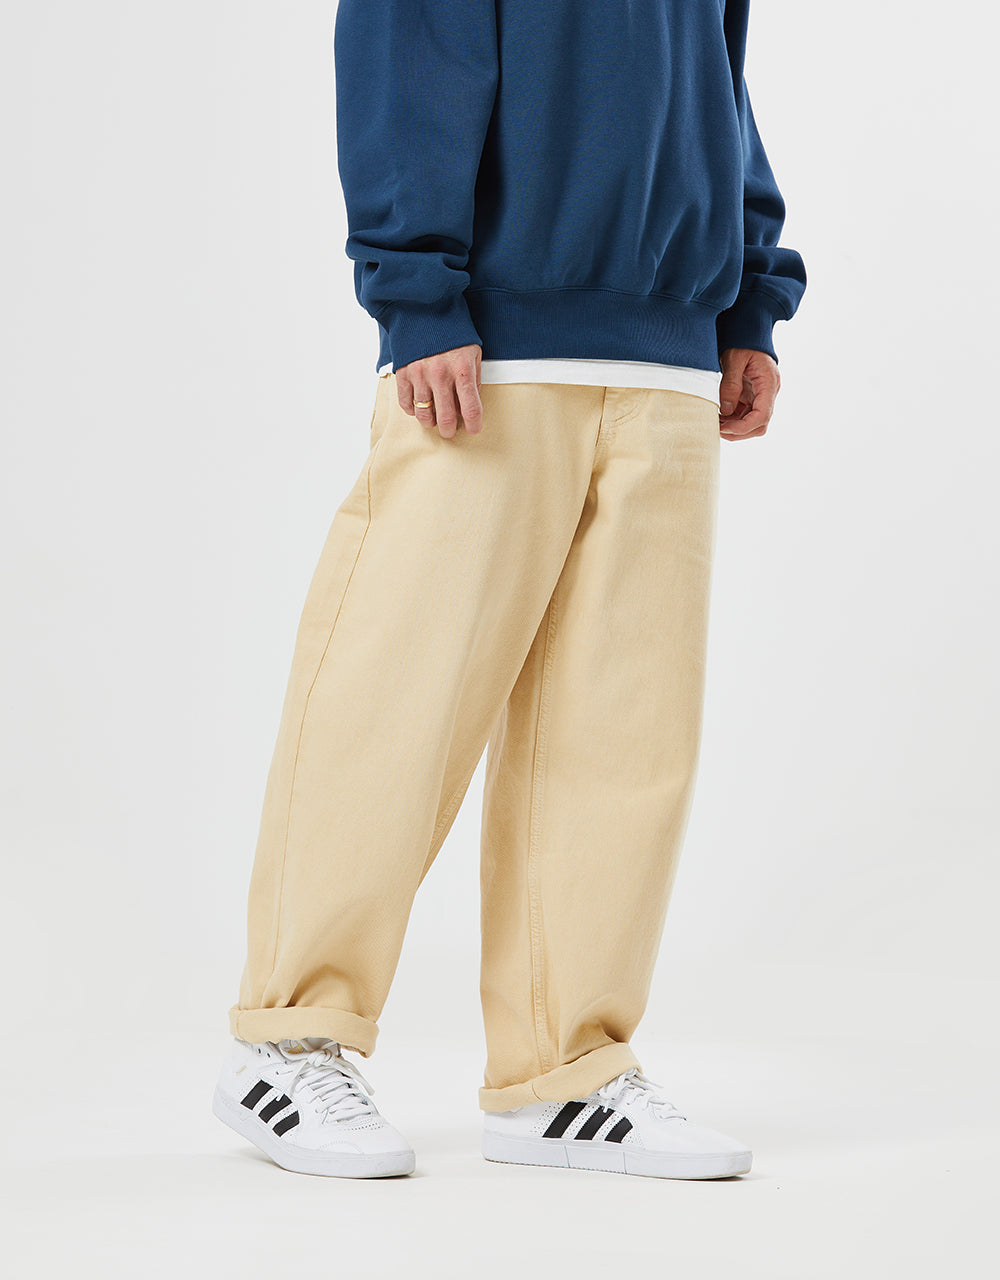 Route One Super Baggy Denim Jeans - Sand